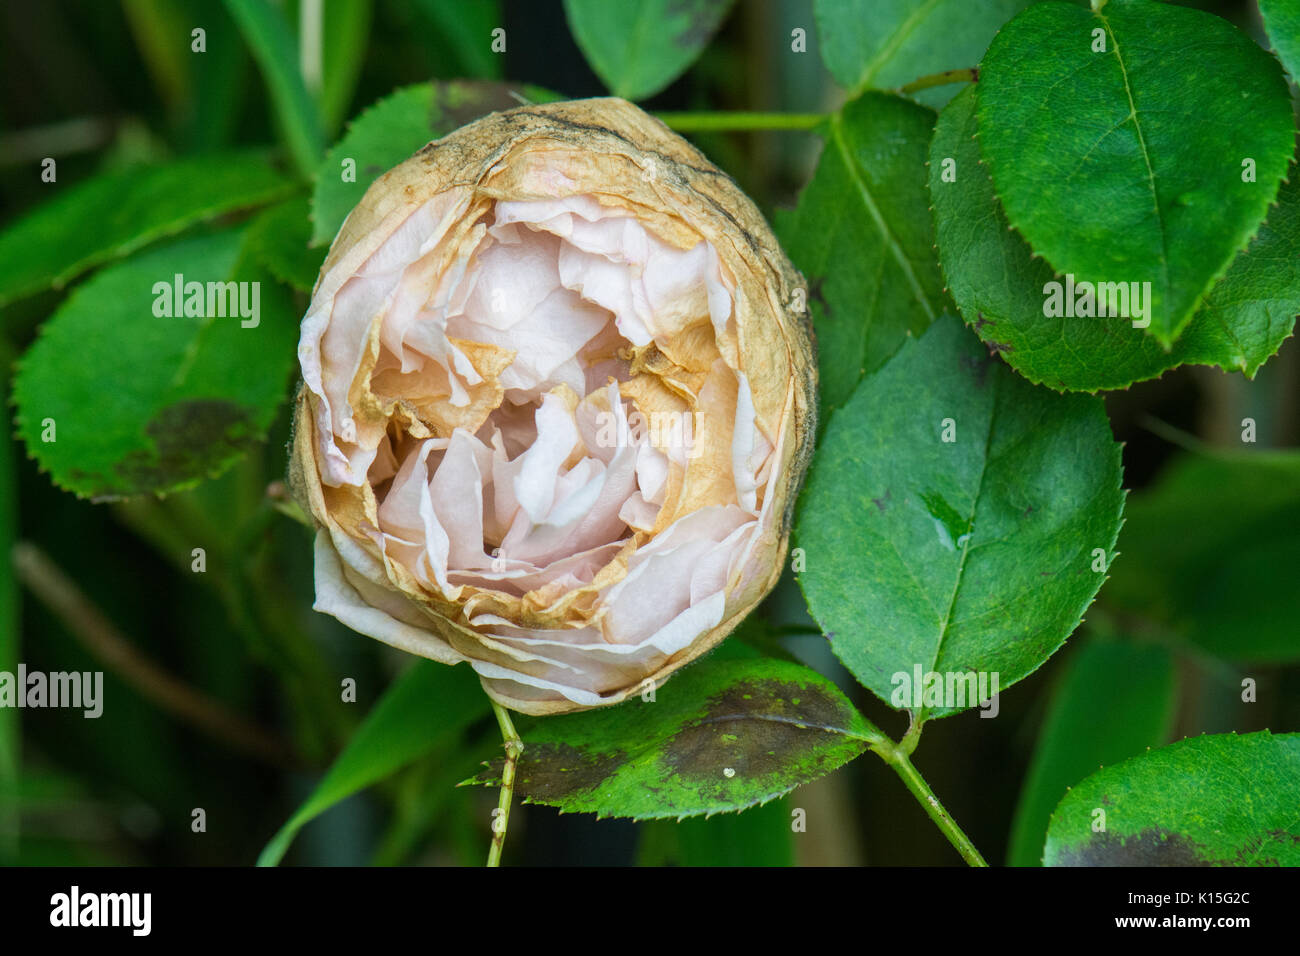 rose balling and black spot in rose grown in shady damp conditions - St Swithun Rose Stock Photo